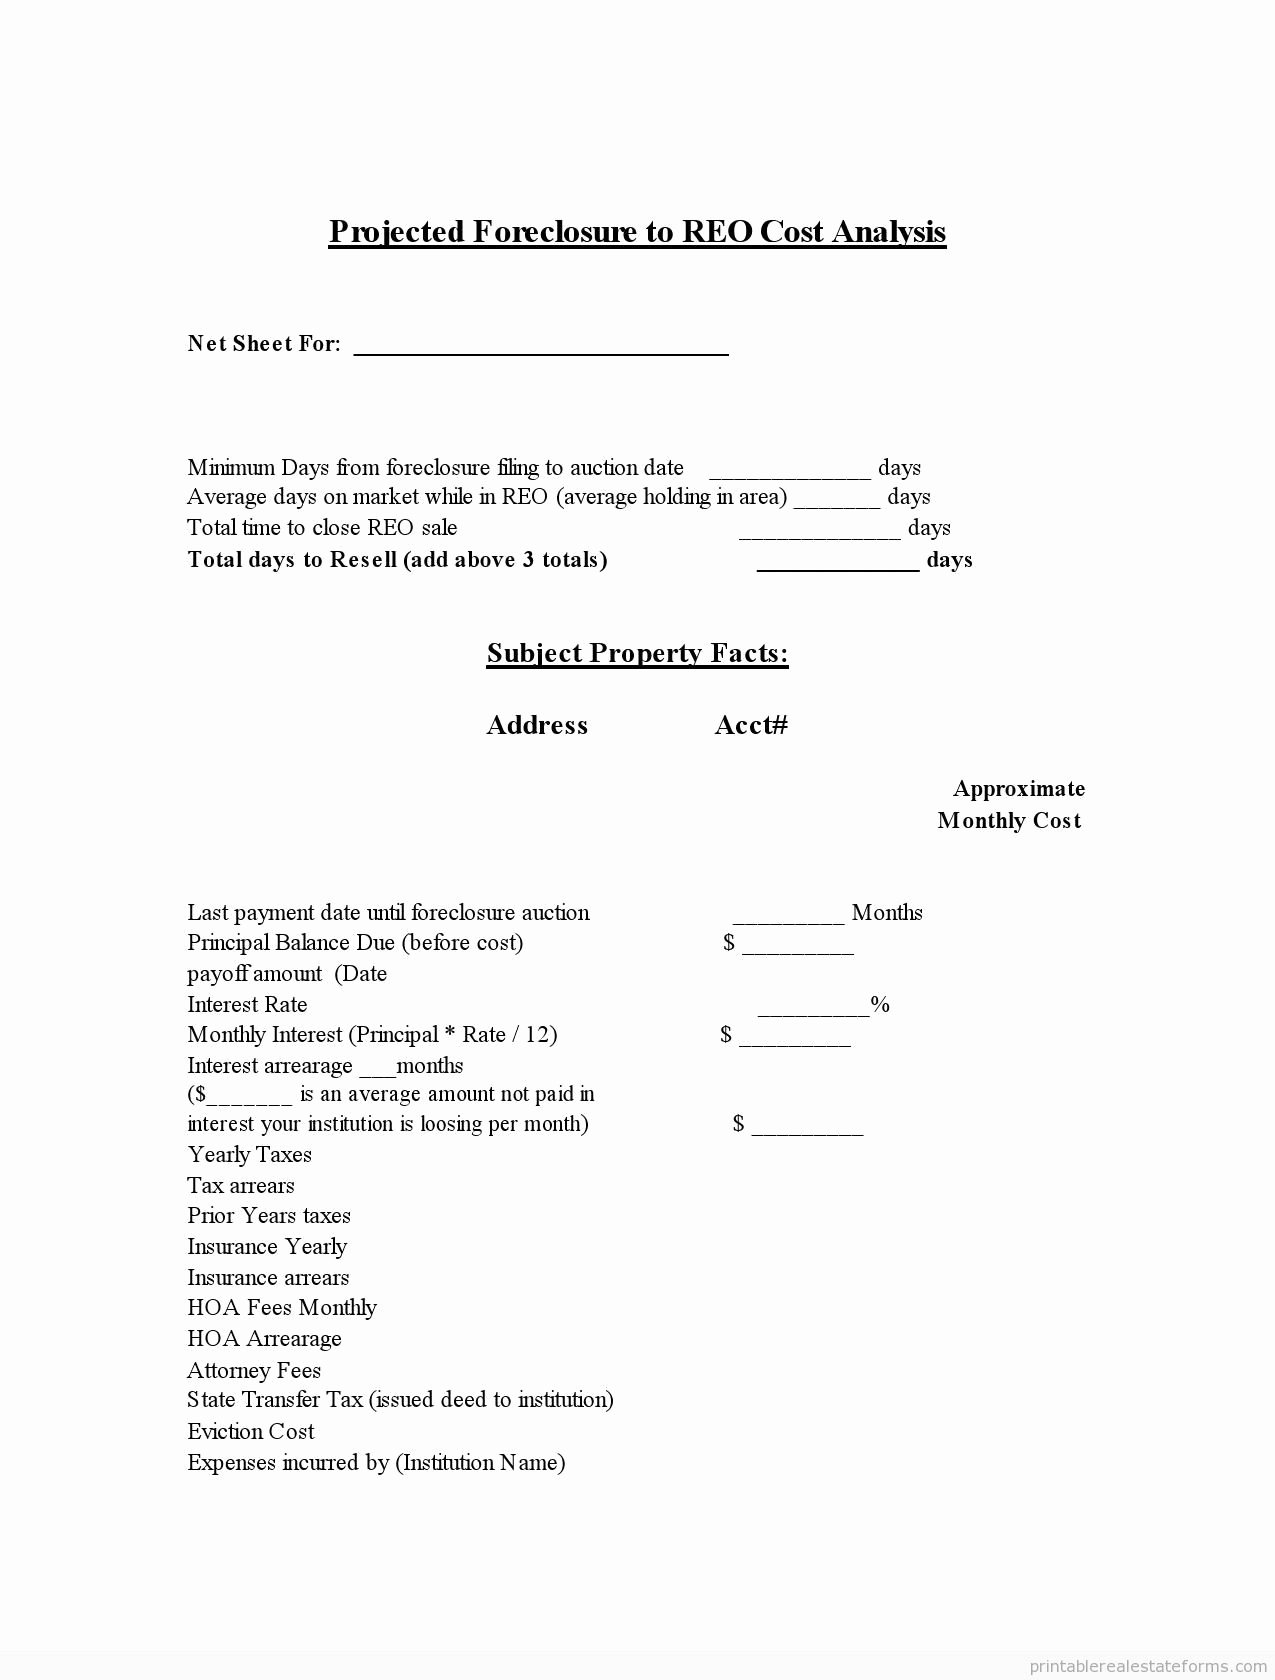 Foreclosure Letter Templates Fresh Copy Of Projected foreclosure to Reo Cost Analysis Pdf